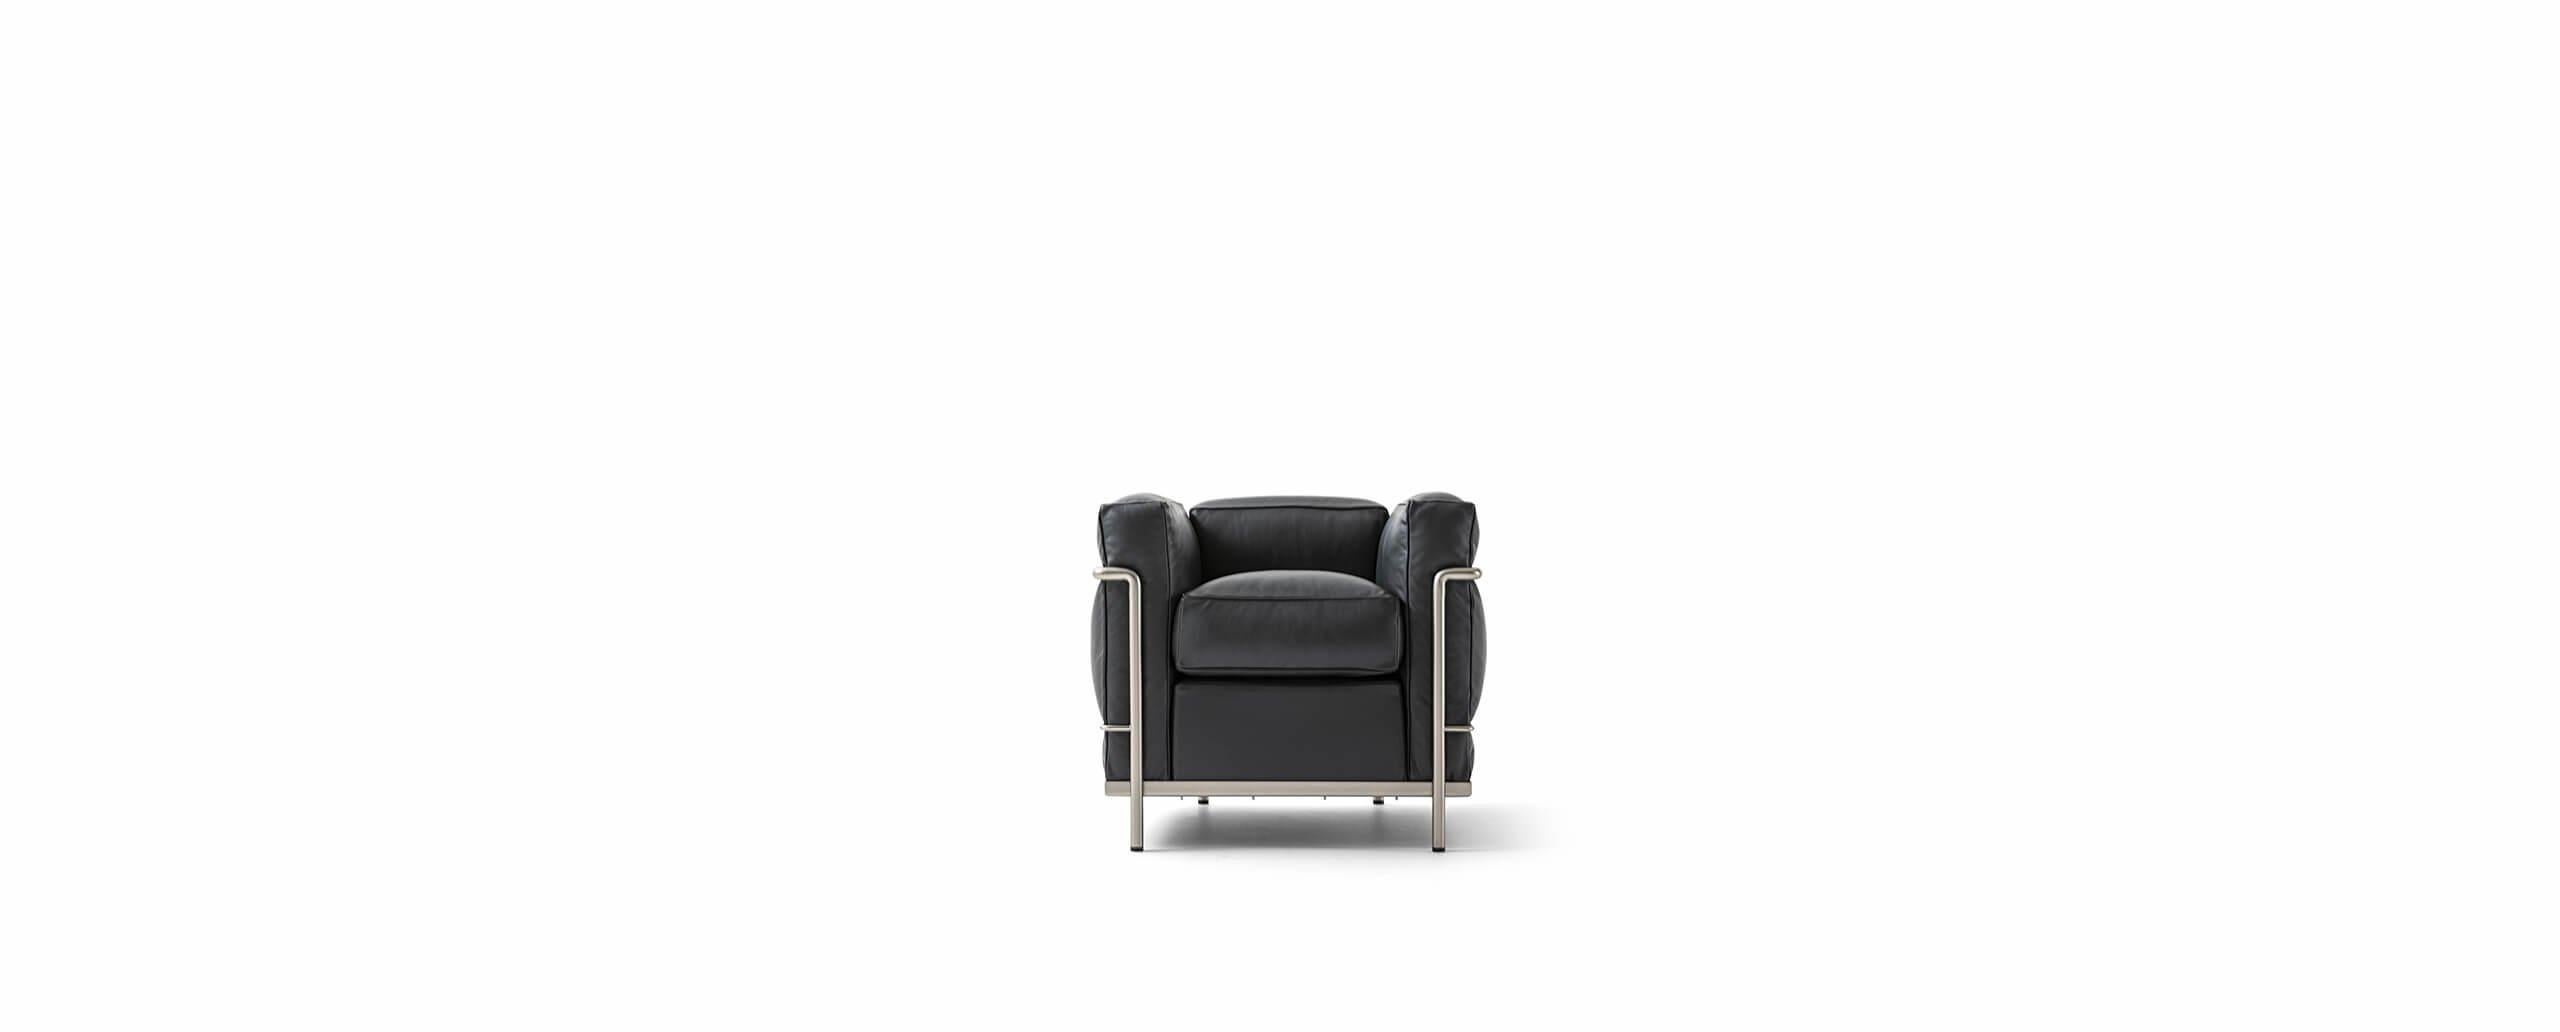 Armchair designed by Le Corbusier, Pierre Jeanneret, Charlotte Perriand in 1928. Relaunched in 2020.
Manufactured by Cassina in Italy.

The LC3 implements the logic of modernity separating the supporting metal frame from its padded elements like the